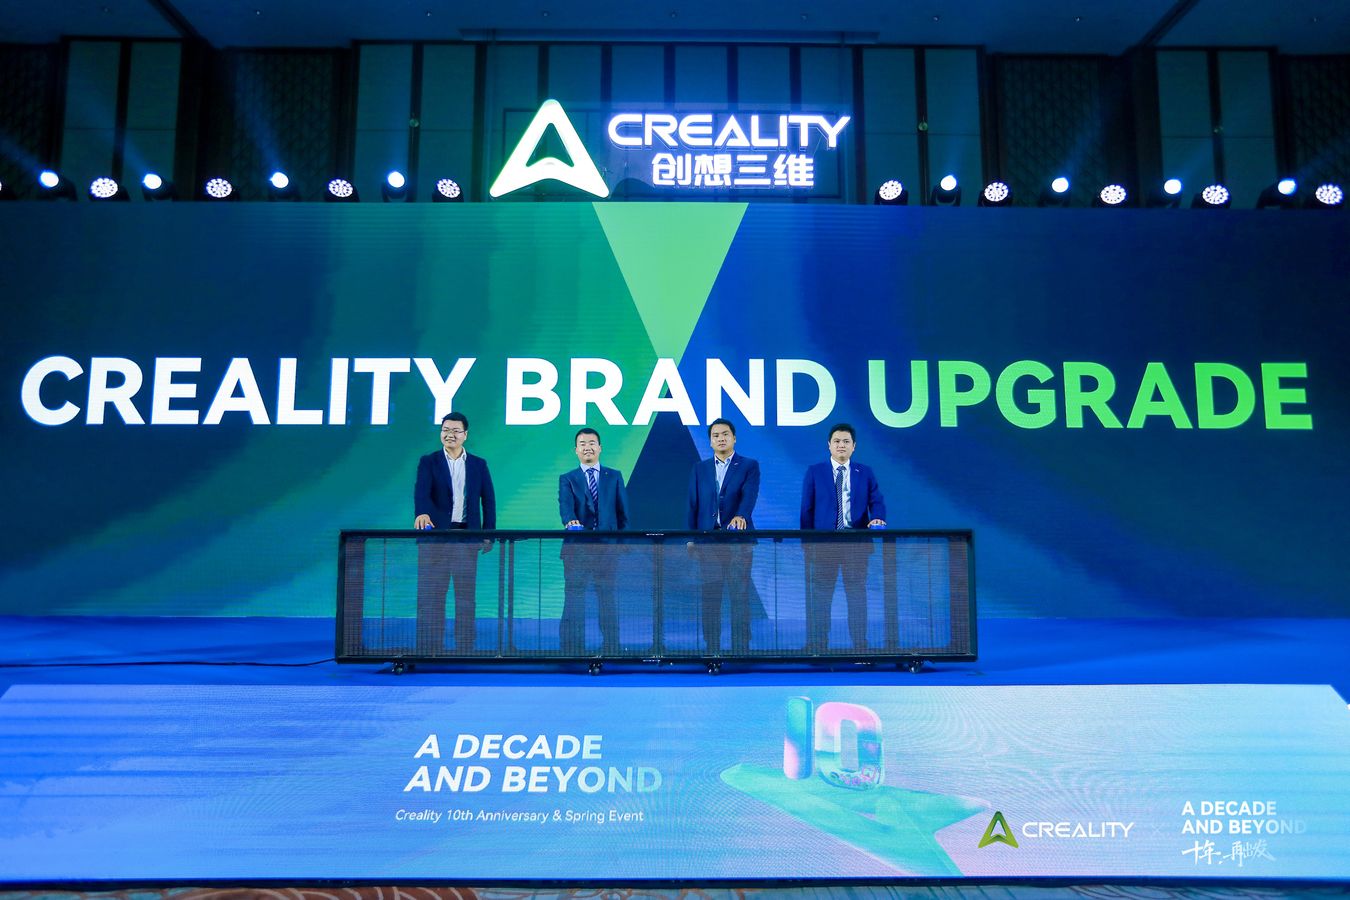 Crelity 10 year aniversarry7 result | “A Decade and Beyond”: Creality’s 10 Years of Innovation and Community Engagement